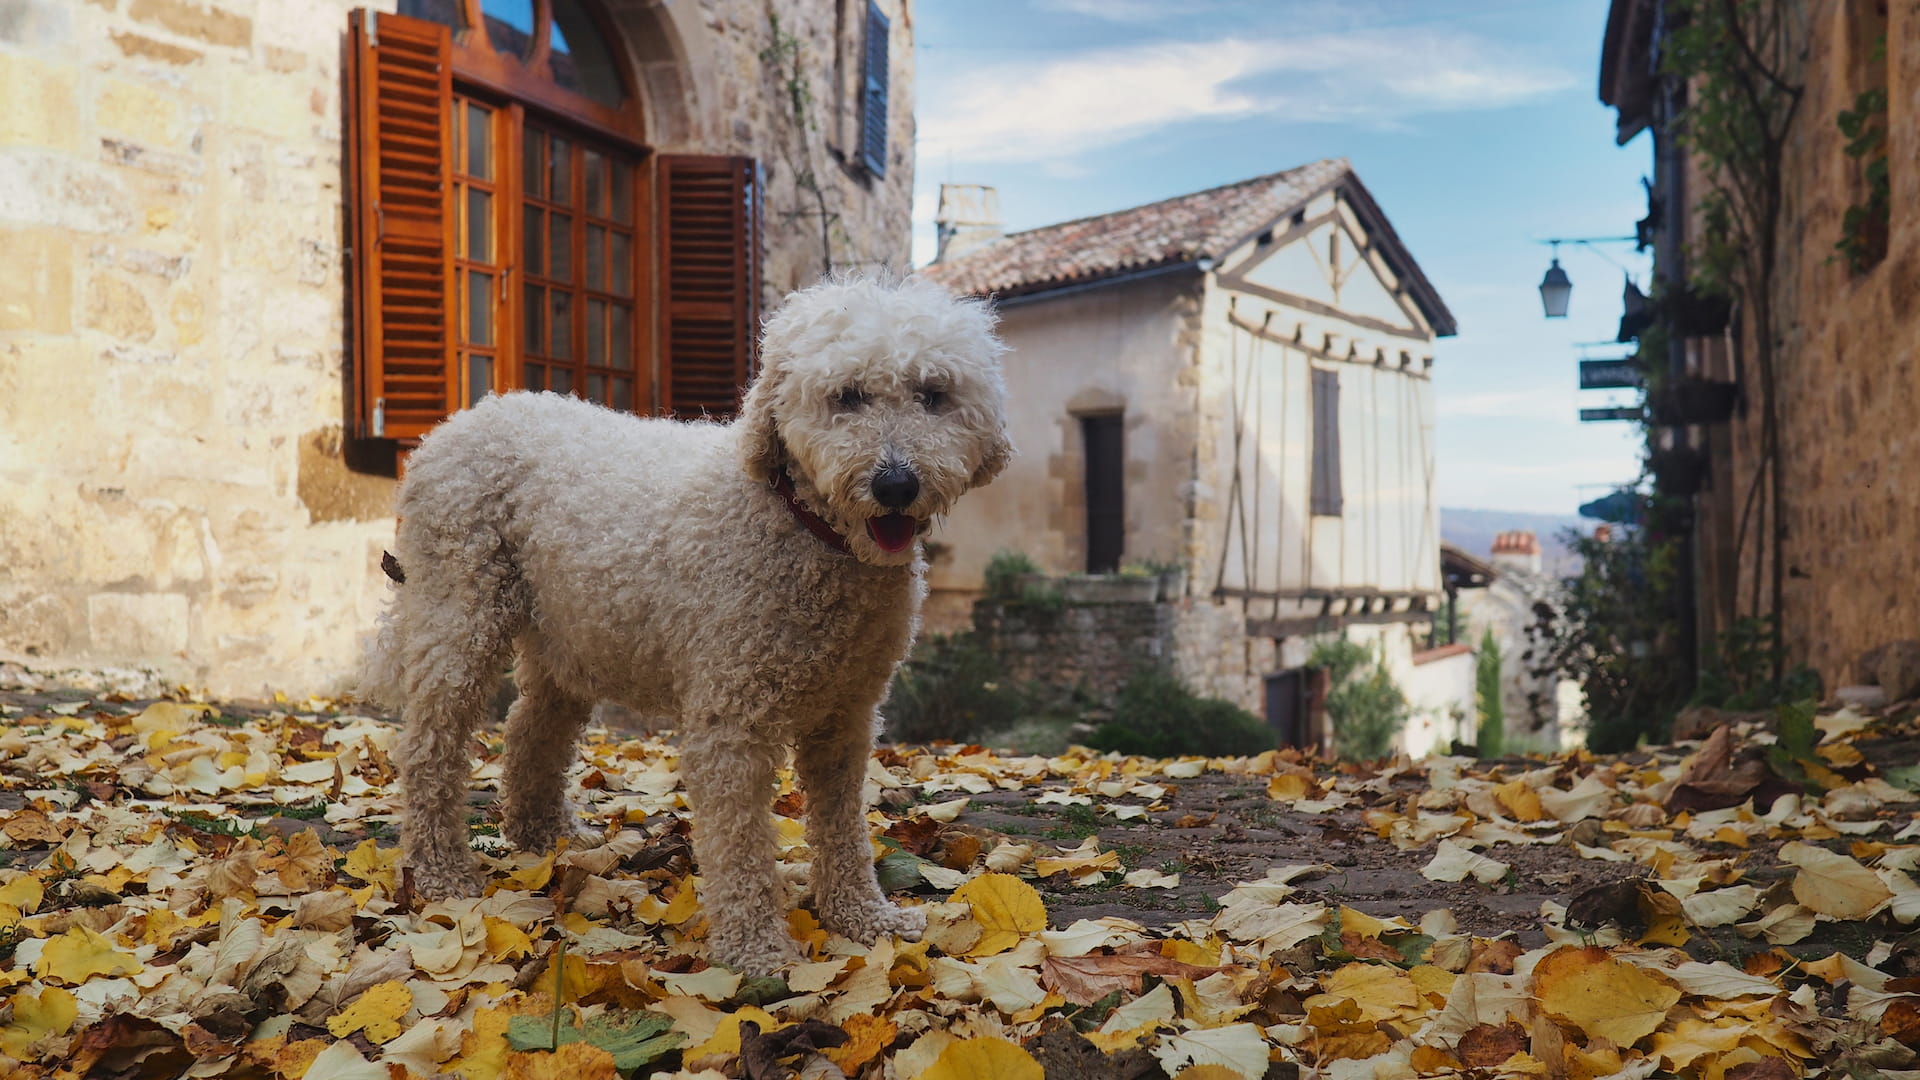 A white dog stands on a cobbled street amidst fallen yellow leaves